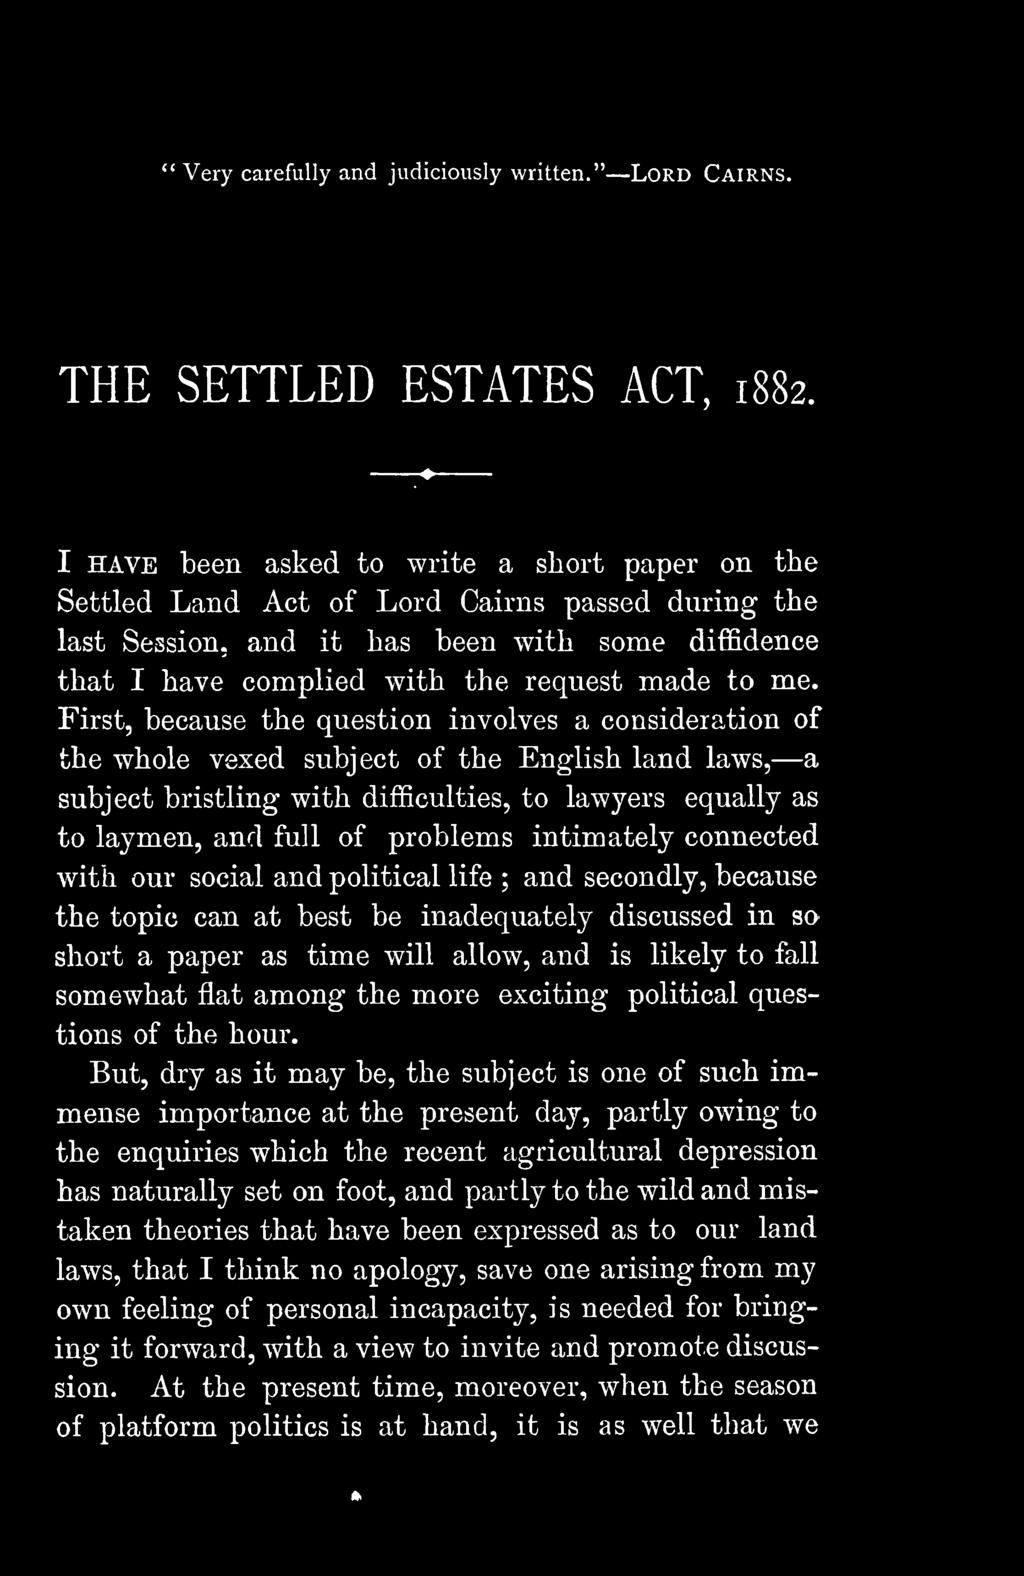 First, because the question involves a consideration of the whole vexed subject of the English land laws, subject bristling with difficulties, to lawyers equally as to laymen, and full of problems